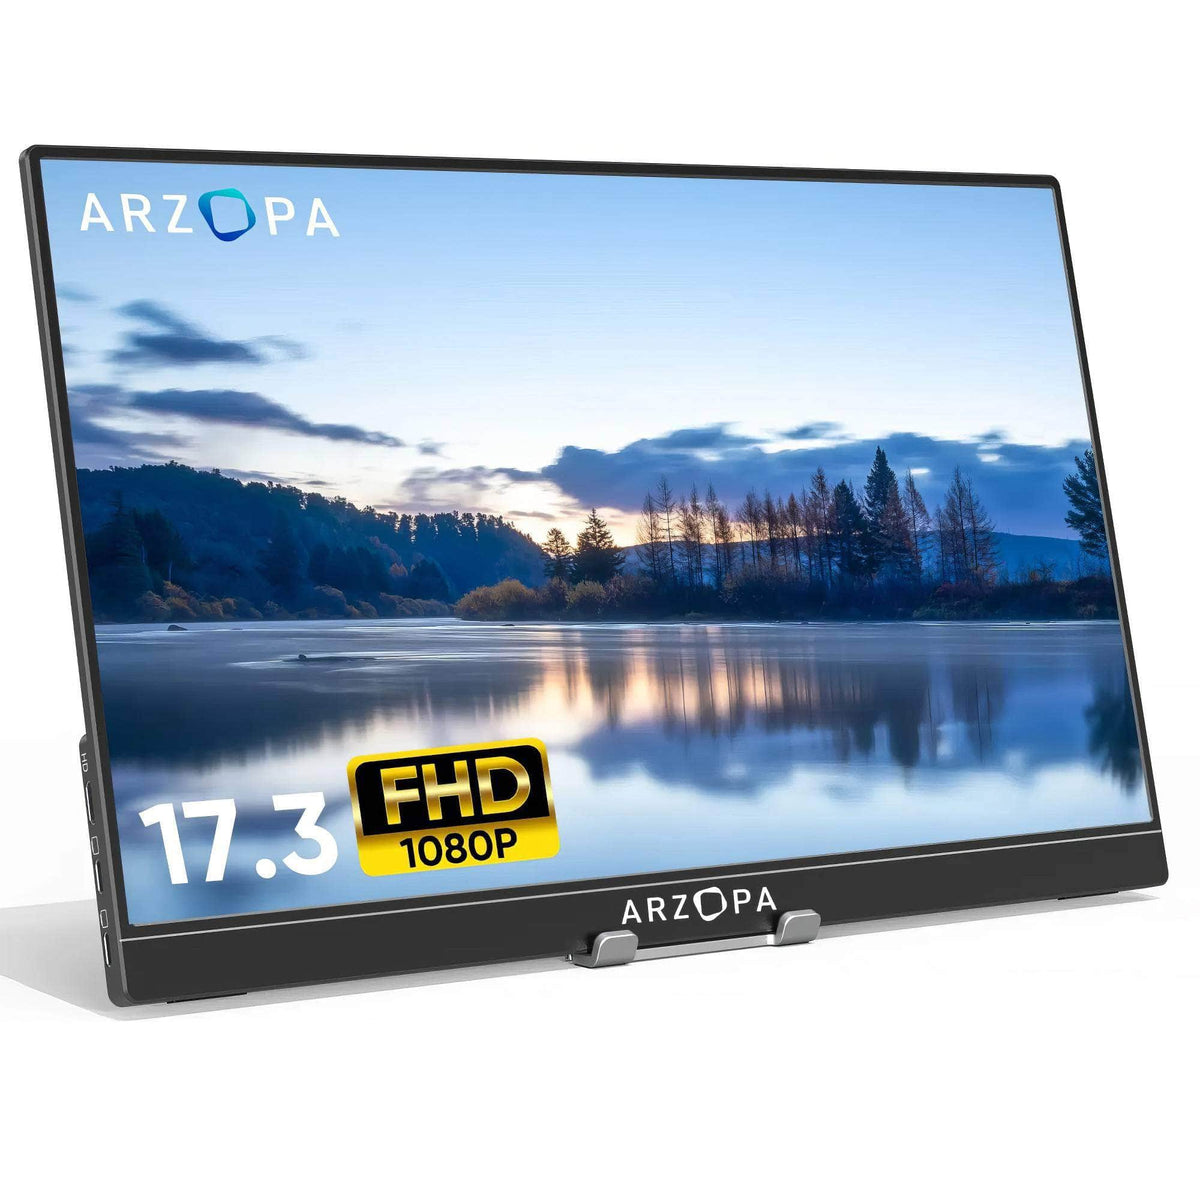 ARZOPA 17.3" FHD Portable Monitor - 1080p External IPS Display, USB-C, HDMI - Gaming Monitor for PC, Phone, Mac, Xbox, PS5, Switch 17.3 A1 MAX